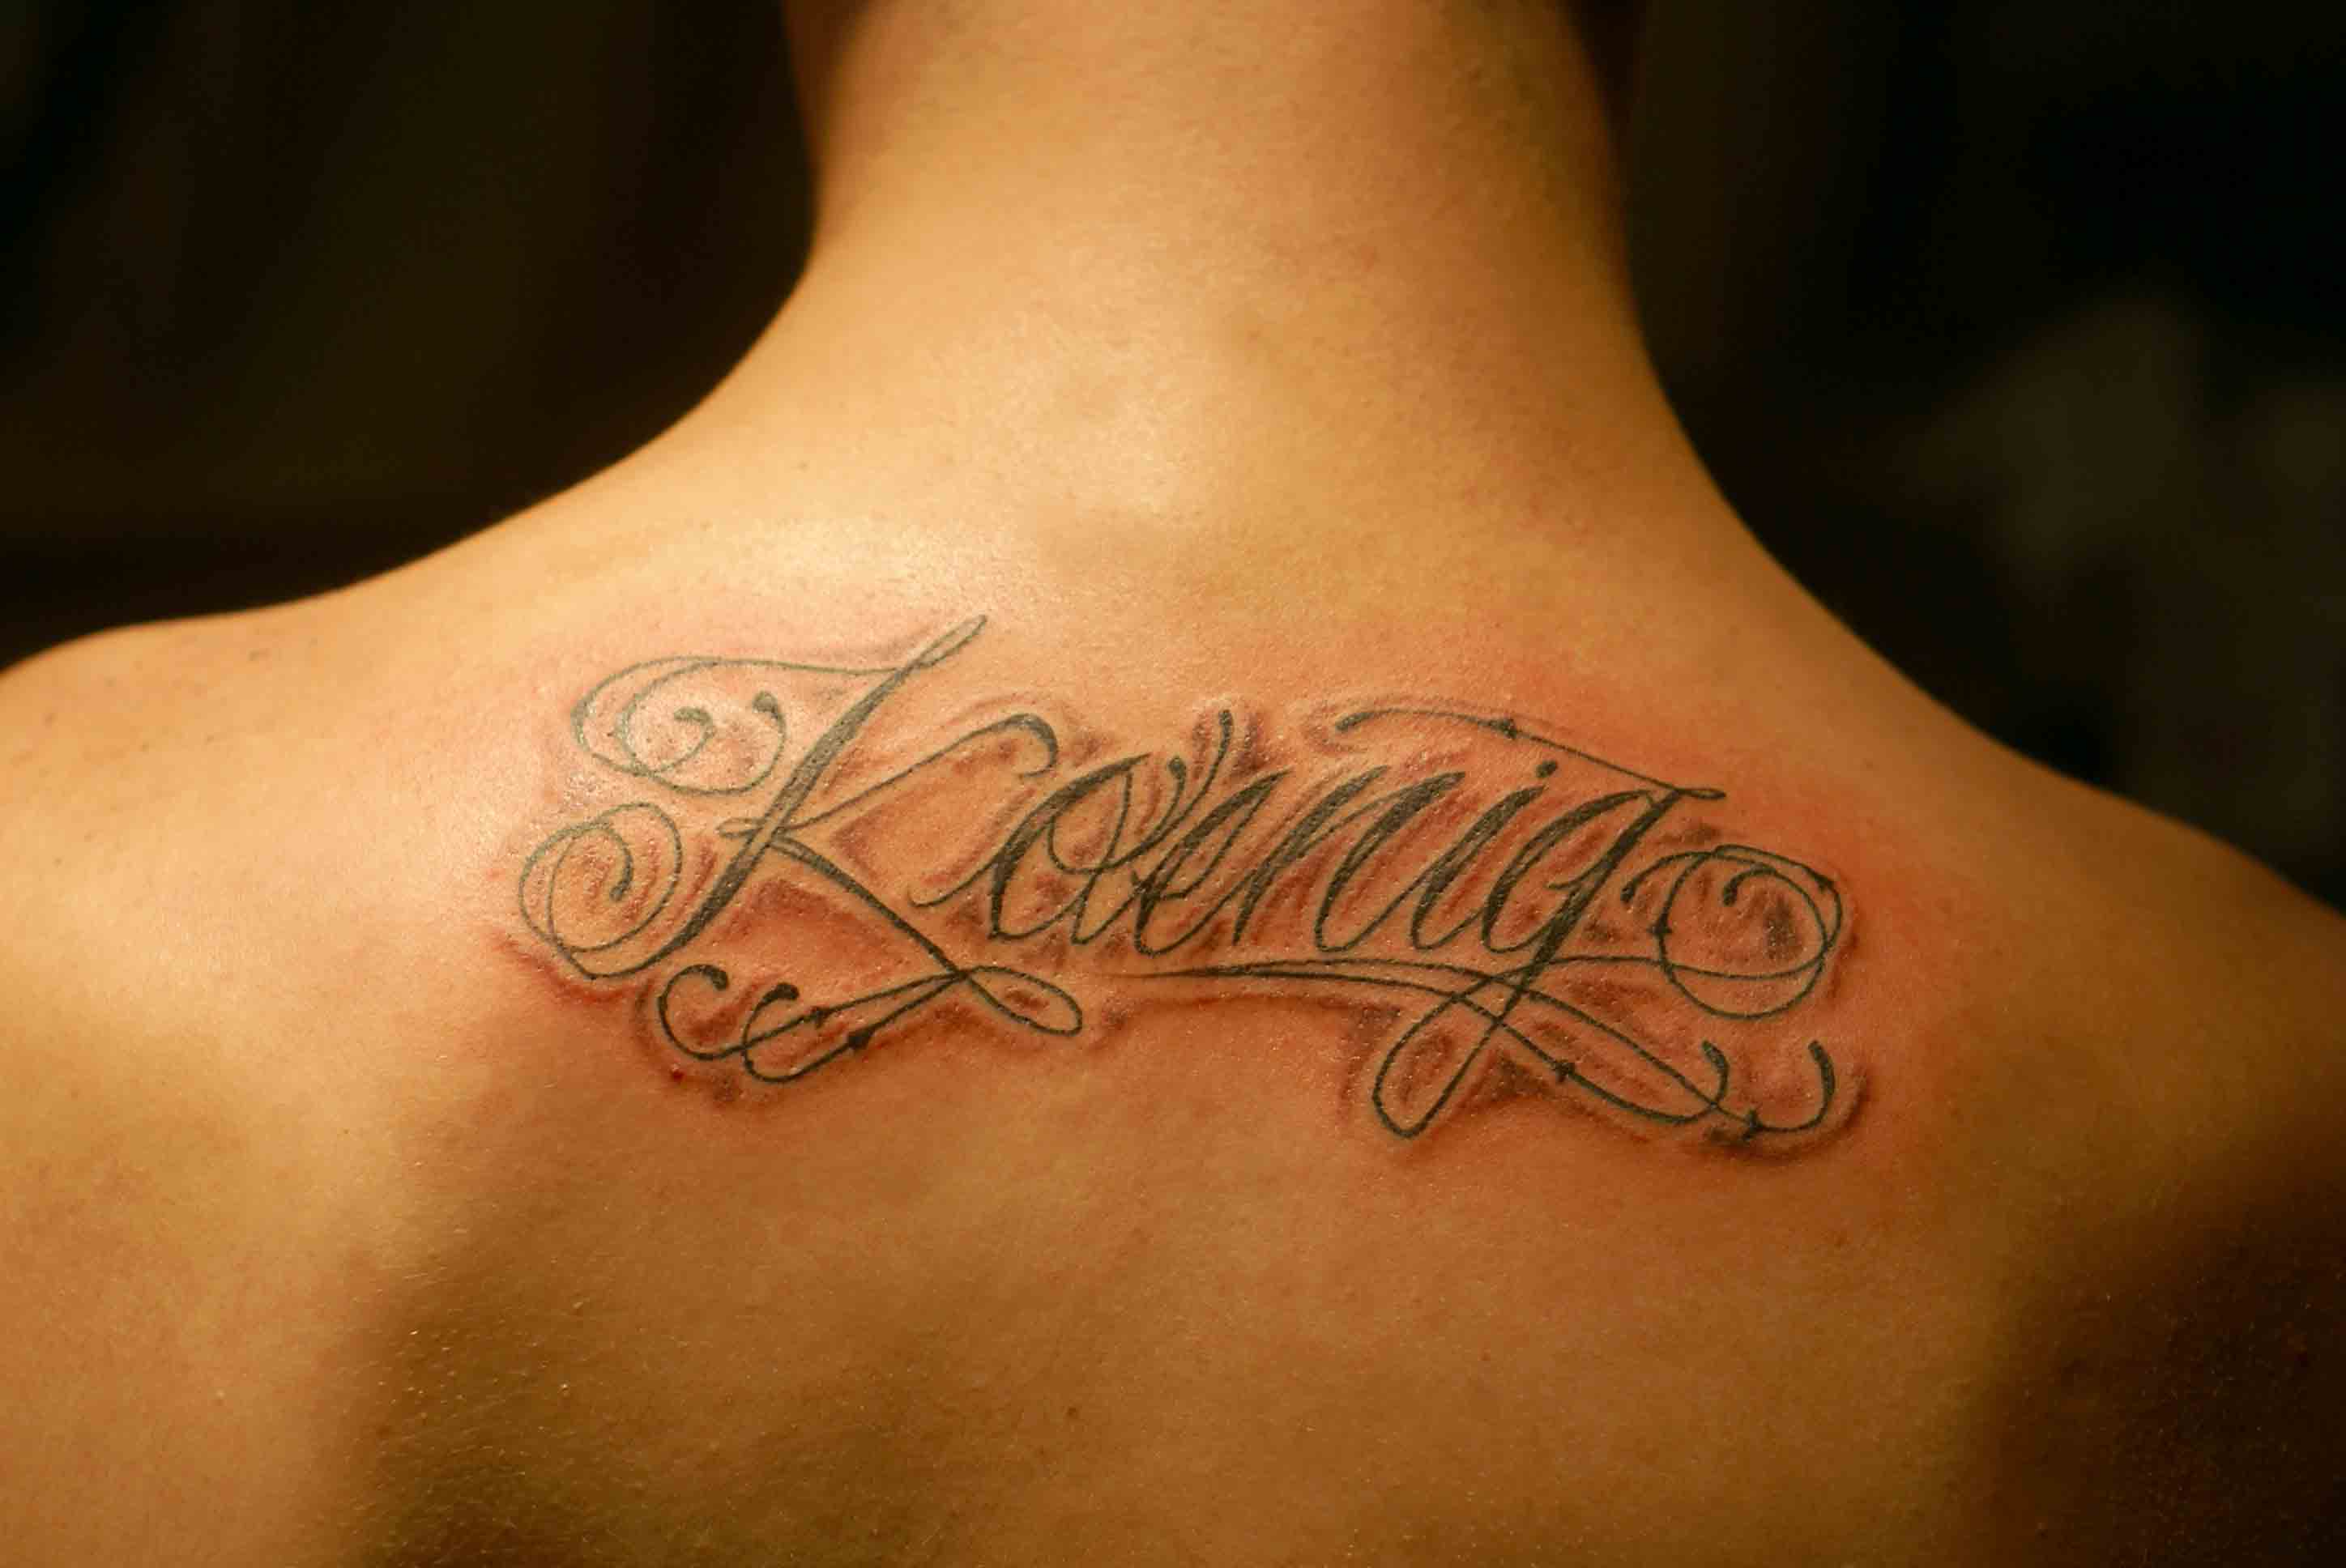 tattoo designs with kids names